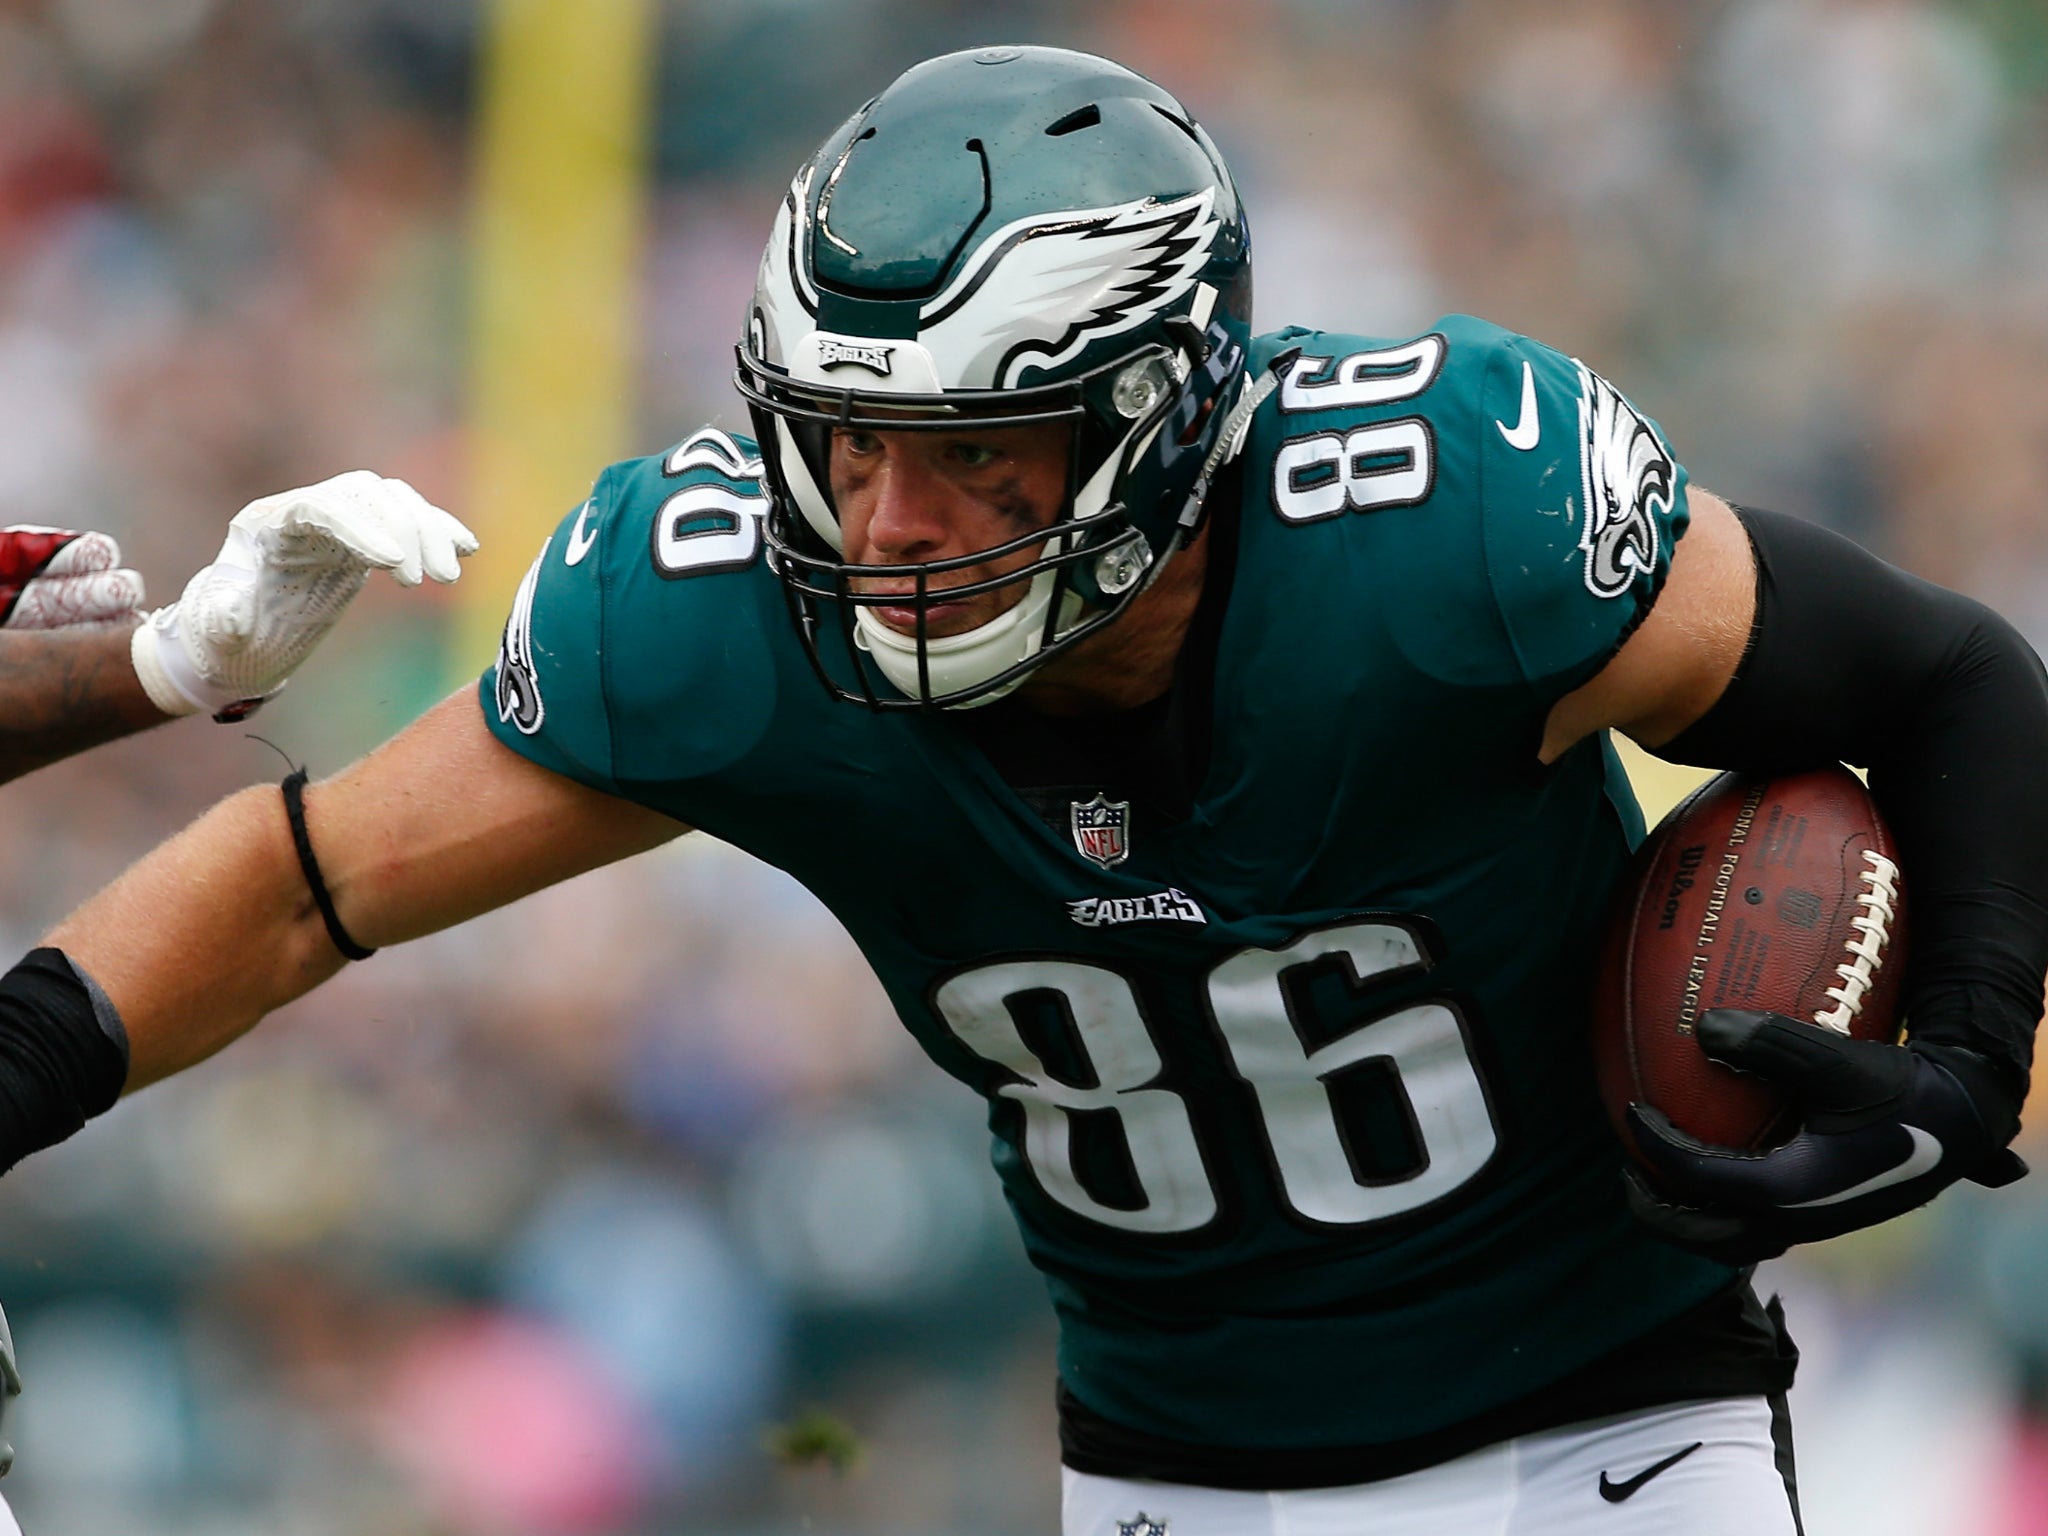 Zach Ertz #86 of the Philadelphia Eagles slams Fox News for using a picture of him praying in a story about President Donald Trump disinviting players to the White House for kneeling during the national anthem